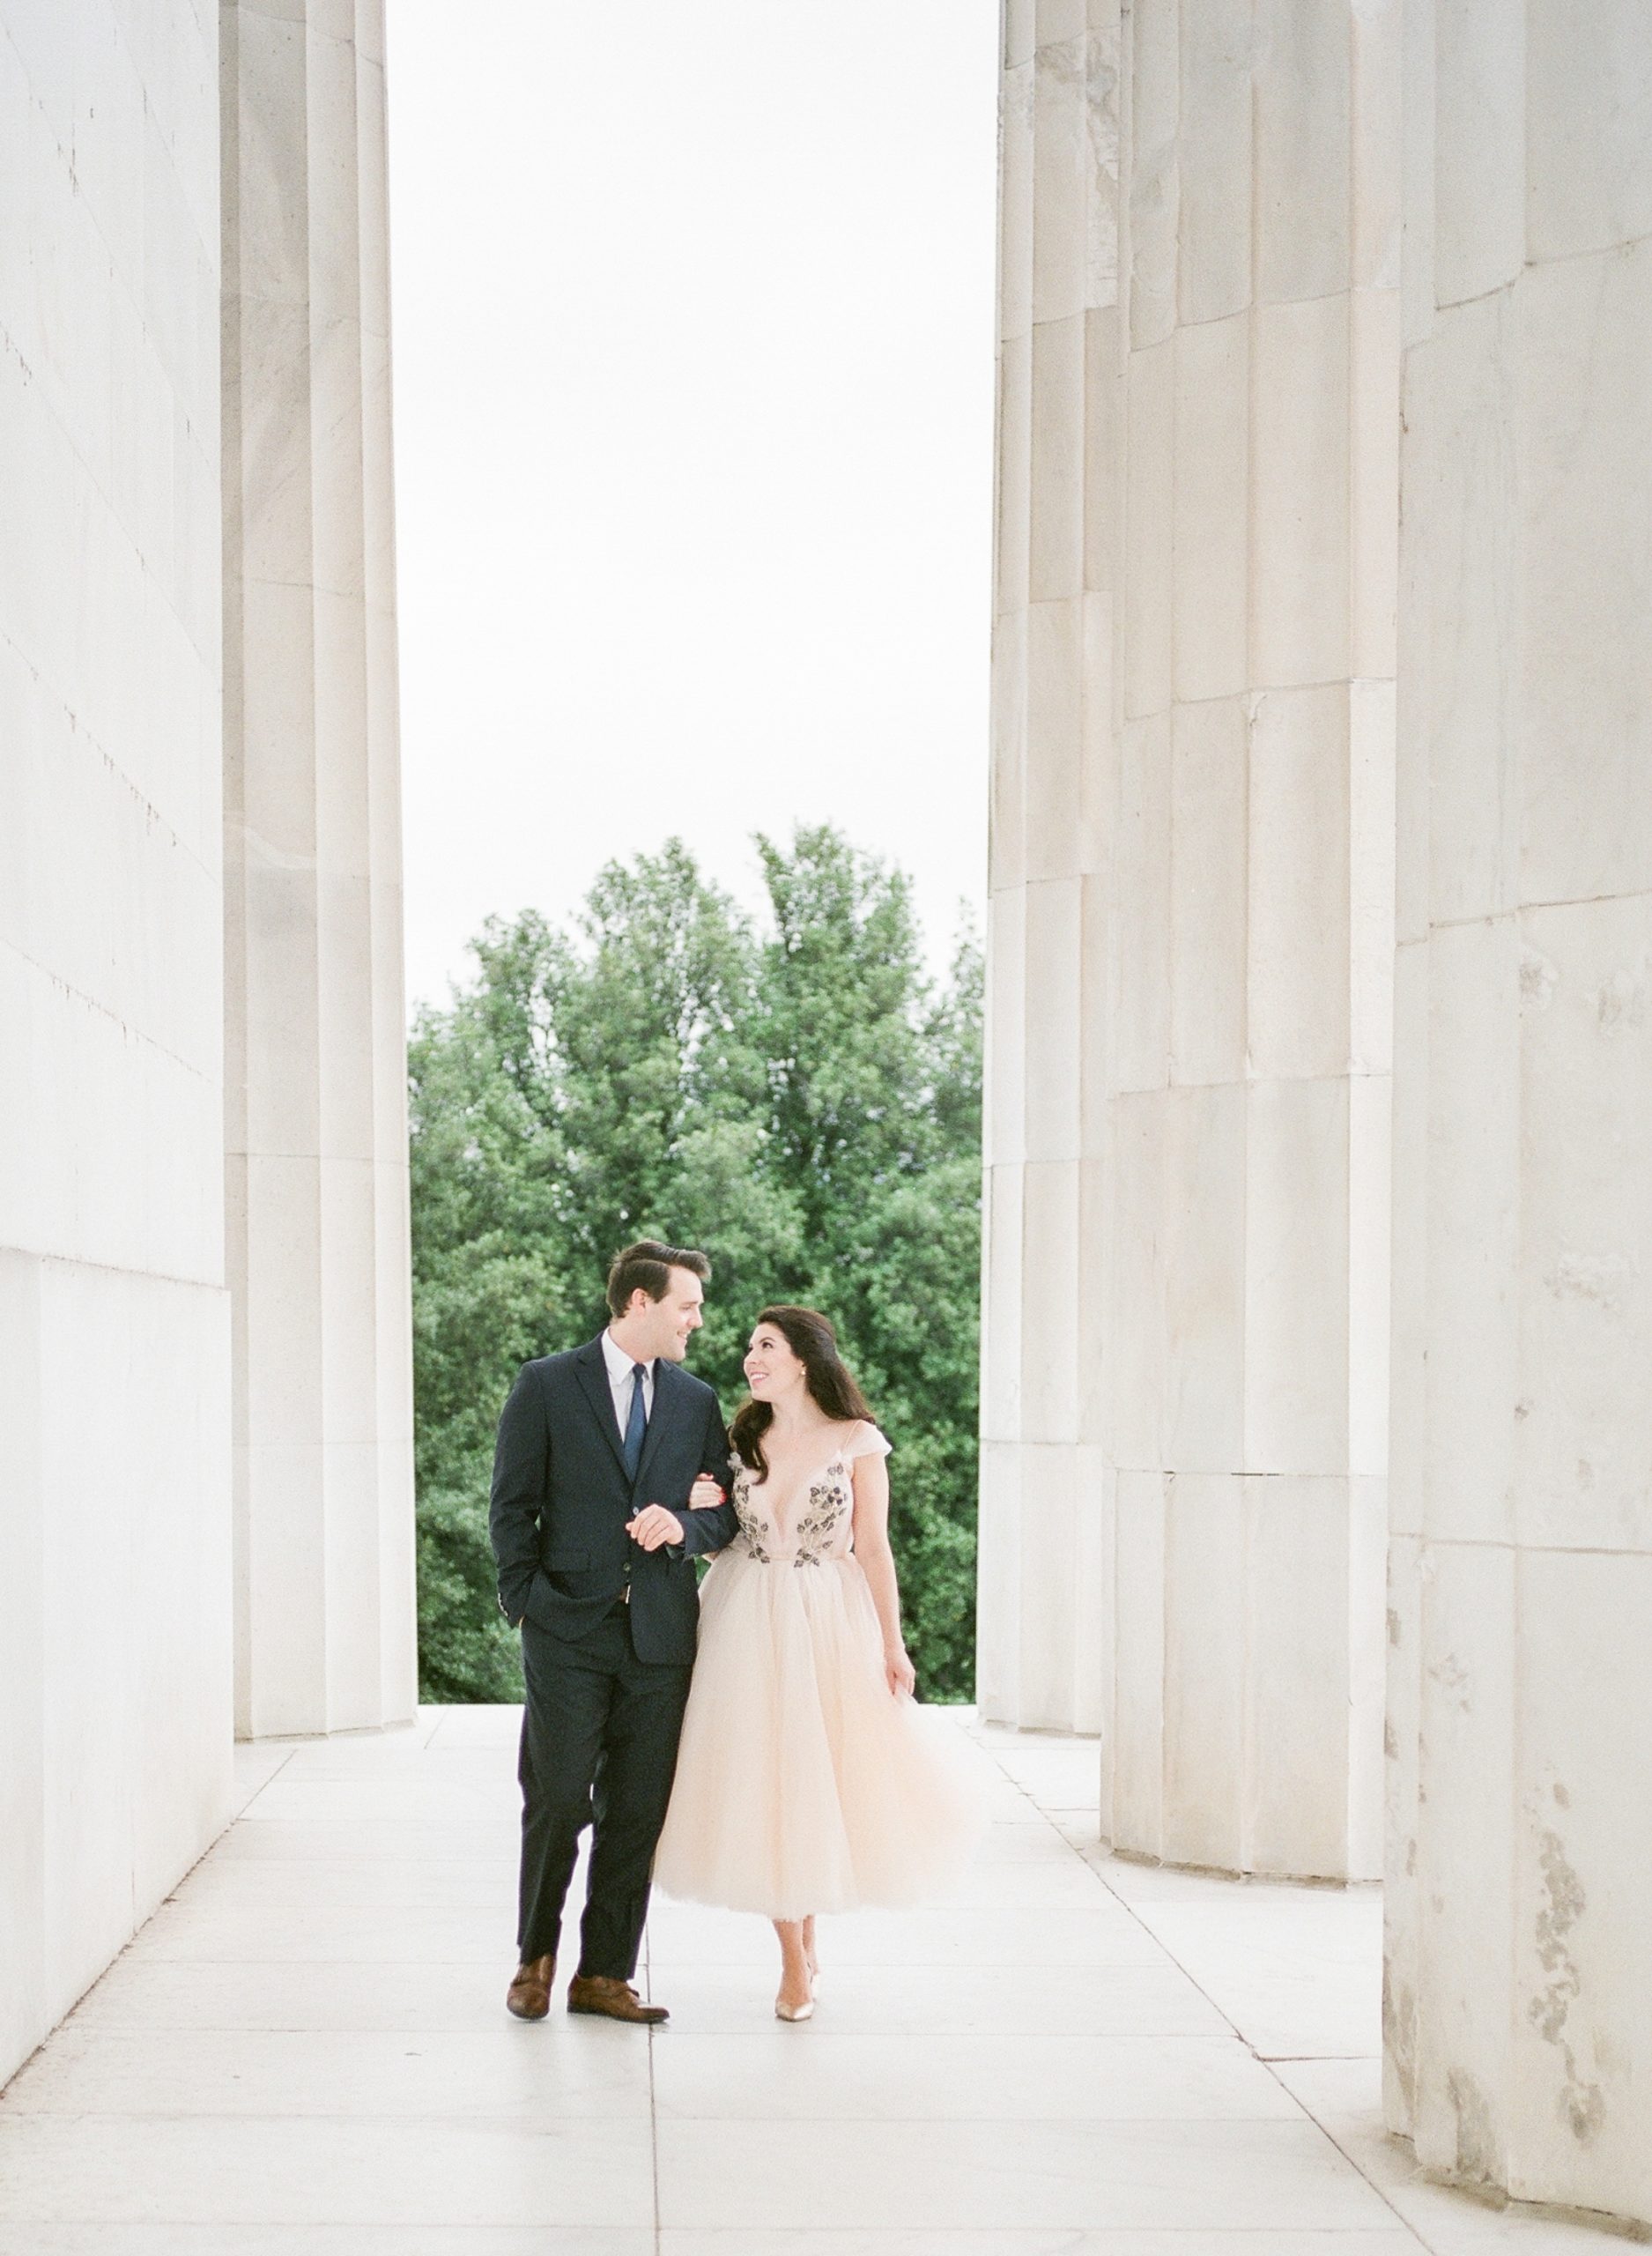 A chic sunrise engagement session at the Lincoln Memorial in Washington DC. Photographed by fine art film photographer, Alicia Lacey.